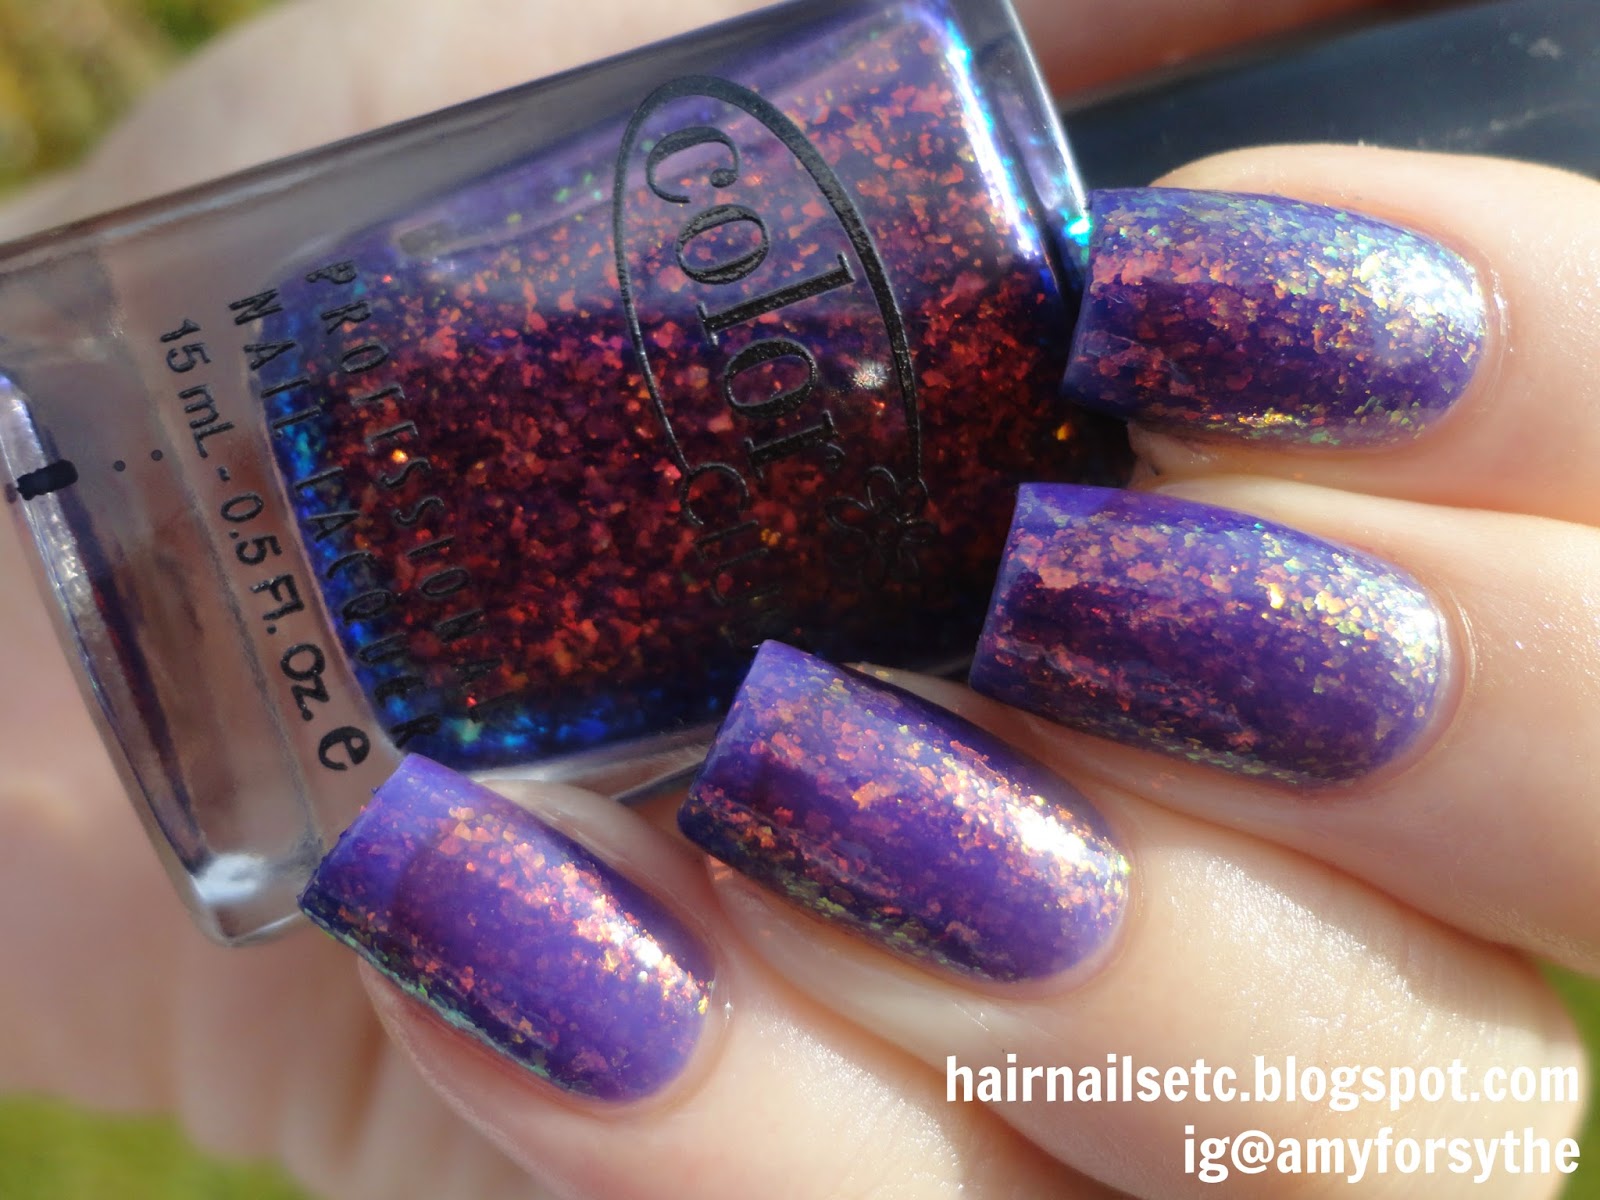 Swatch and Review of Color Club Nail Lacquer in The Uptown from Girl About Town Collection, Fall 2013